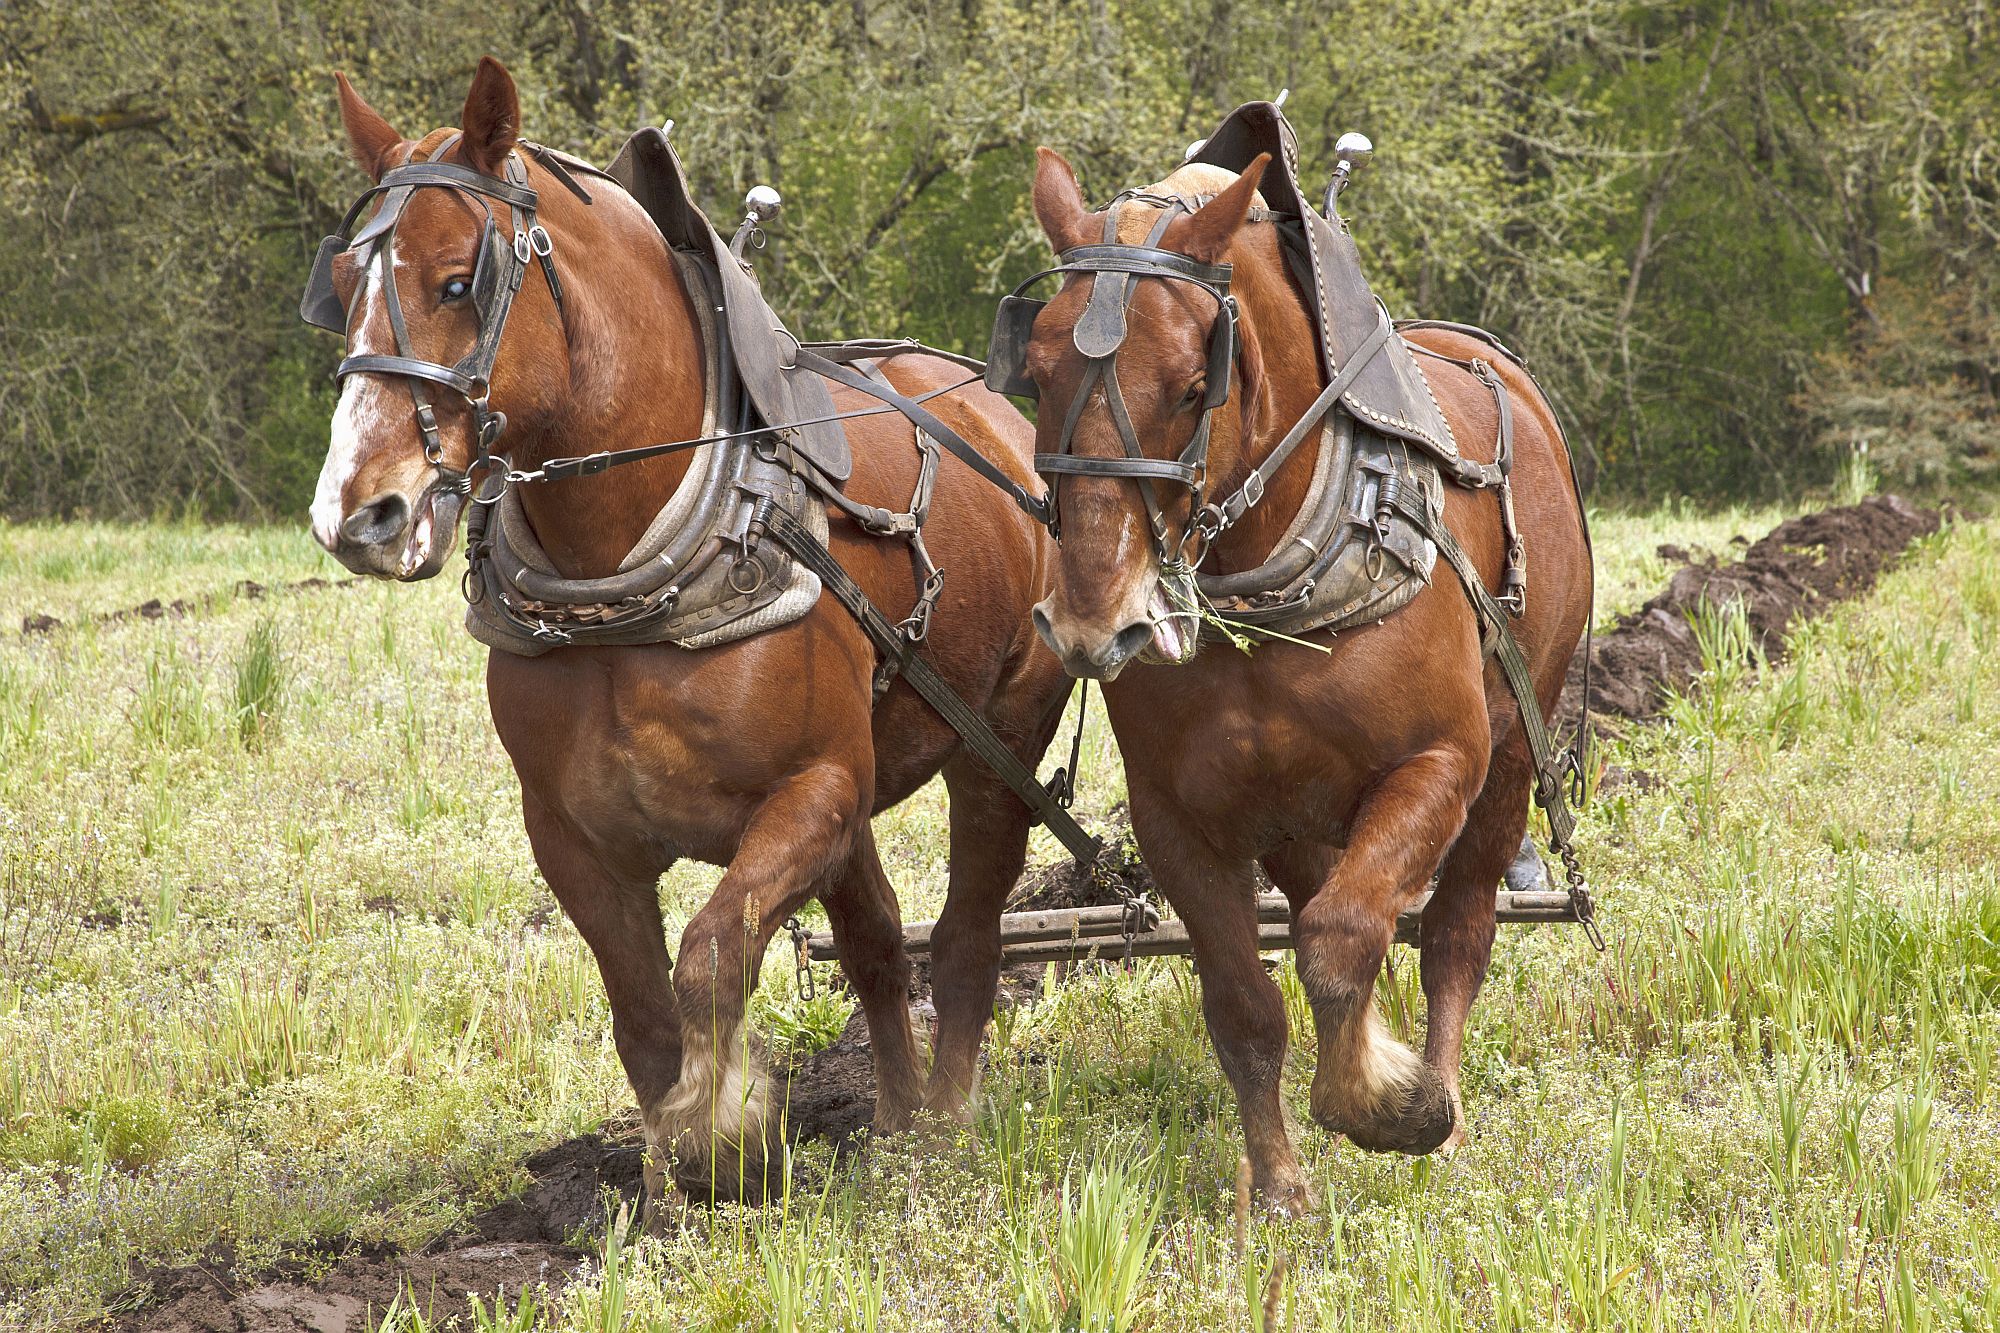 two horses pulling a plough in a field